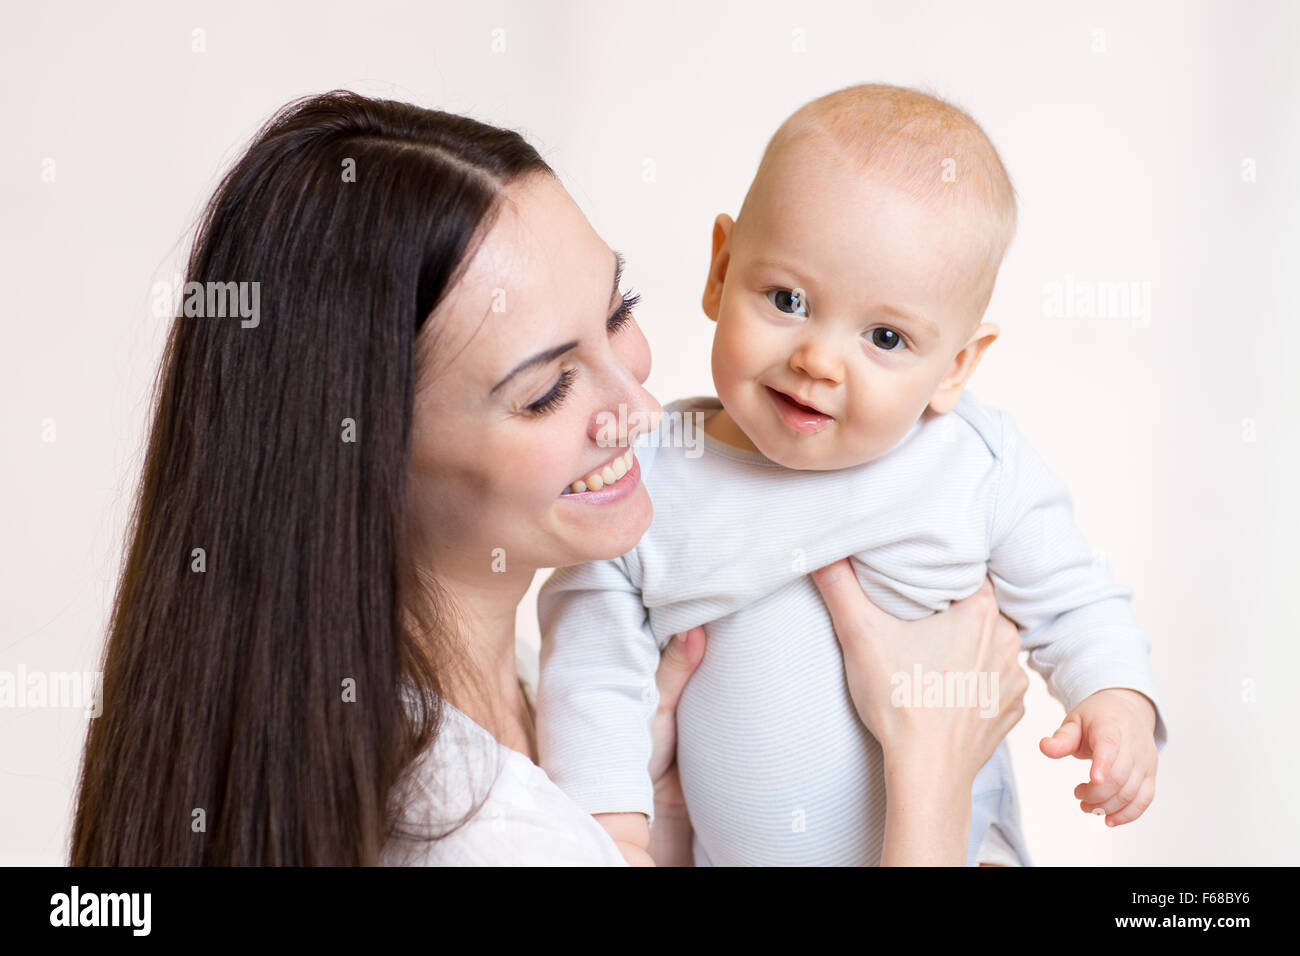 mother and infant baby togetherness Stock Photo